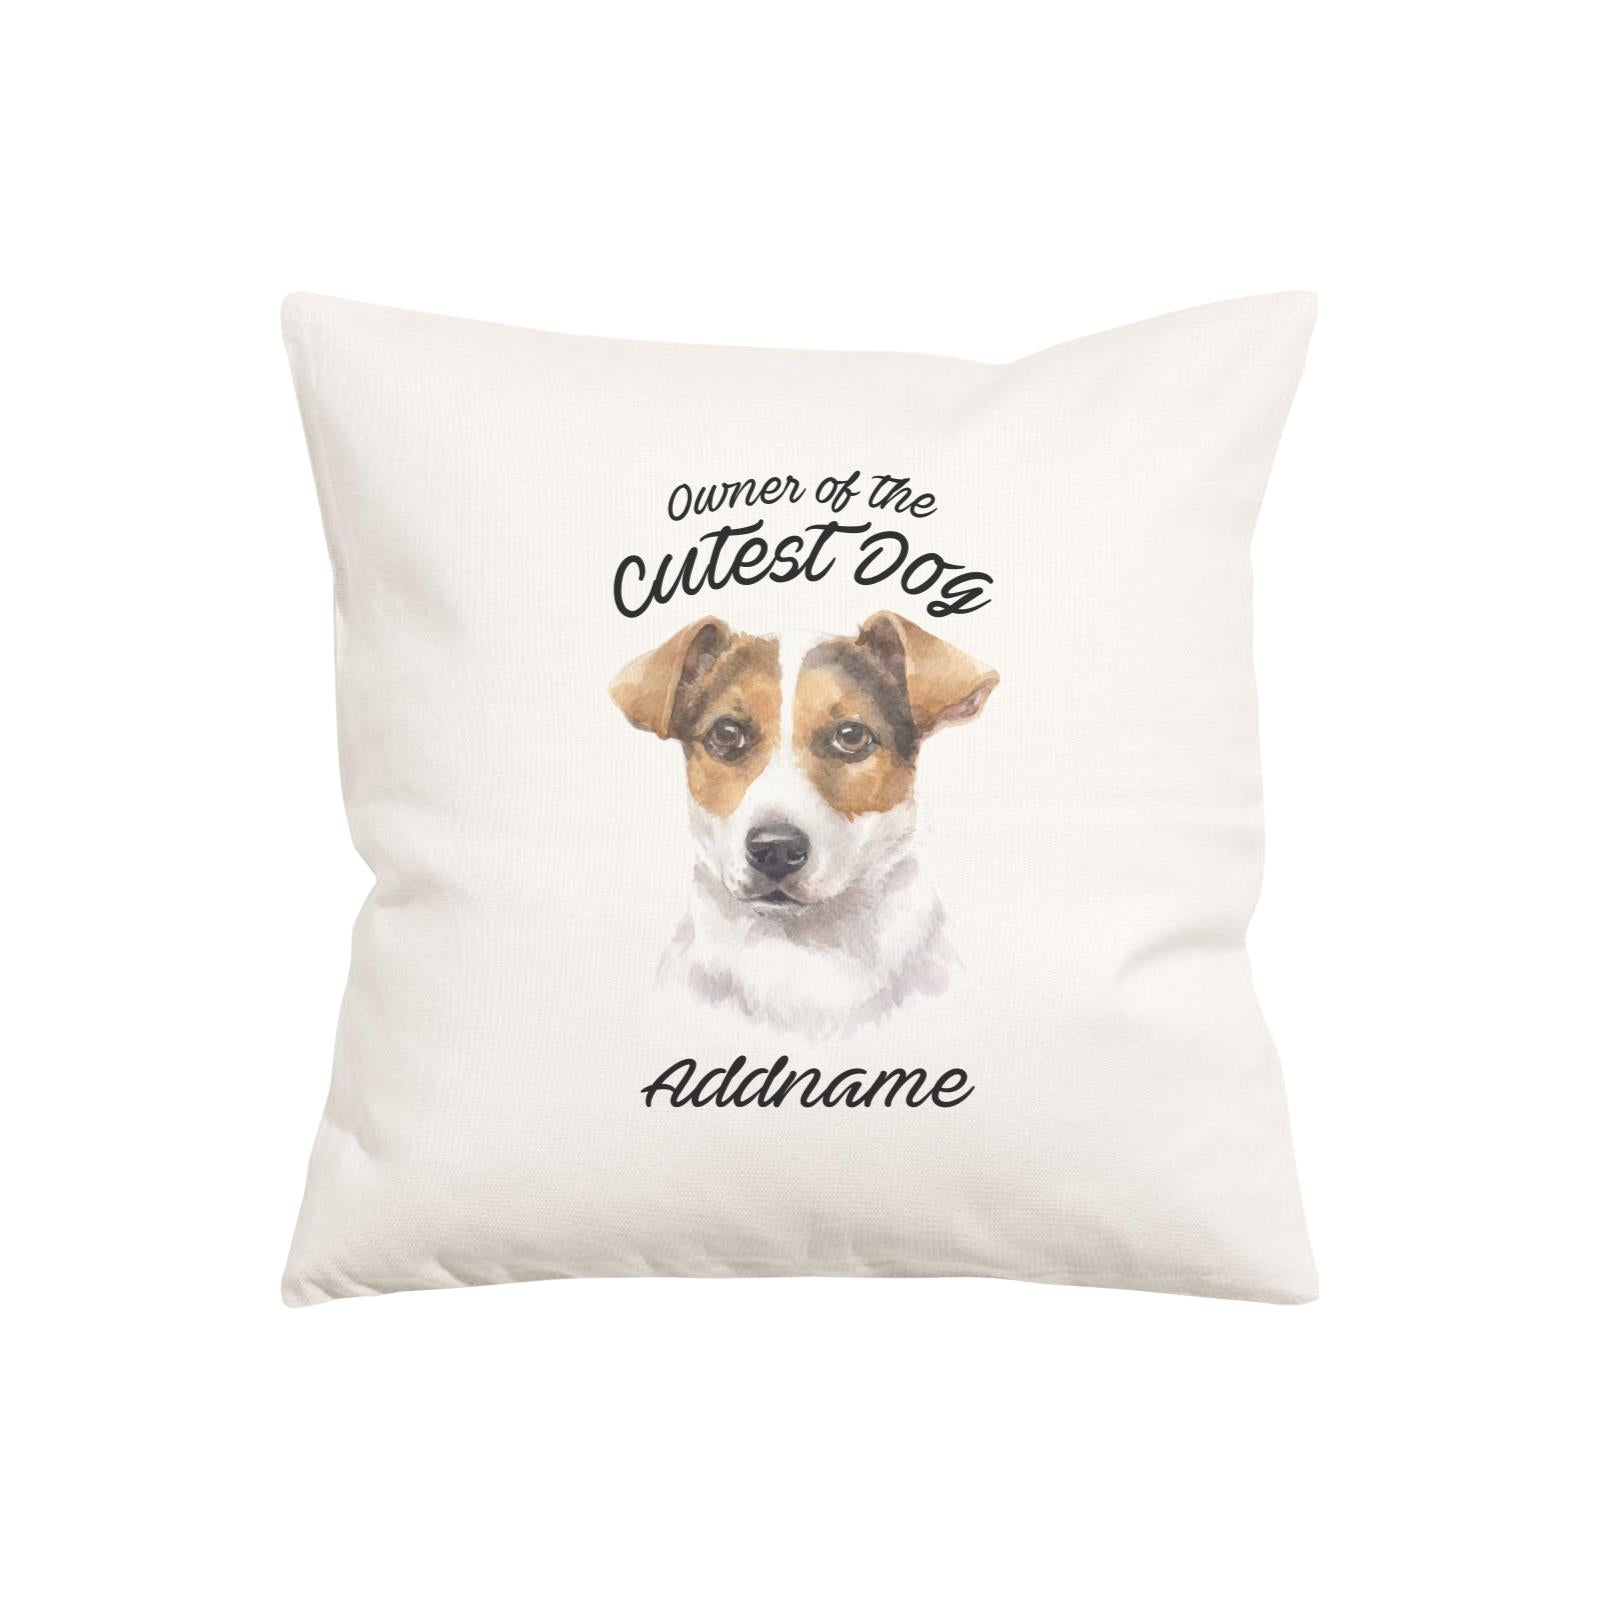 Watercolor Dog Owner Of The Cutest Dog Jack Russell Short Hair Addname Pillow Cushion